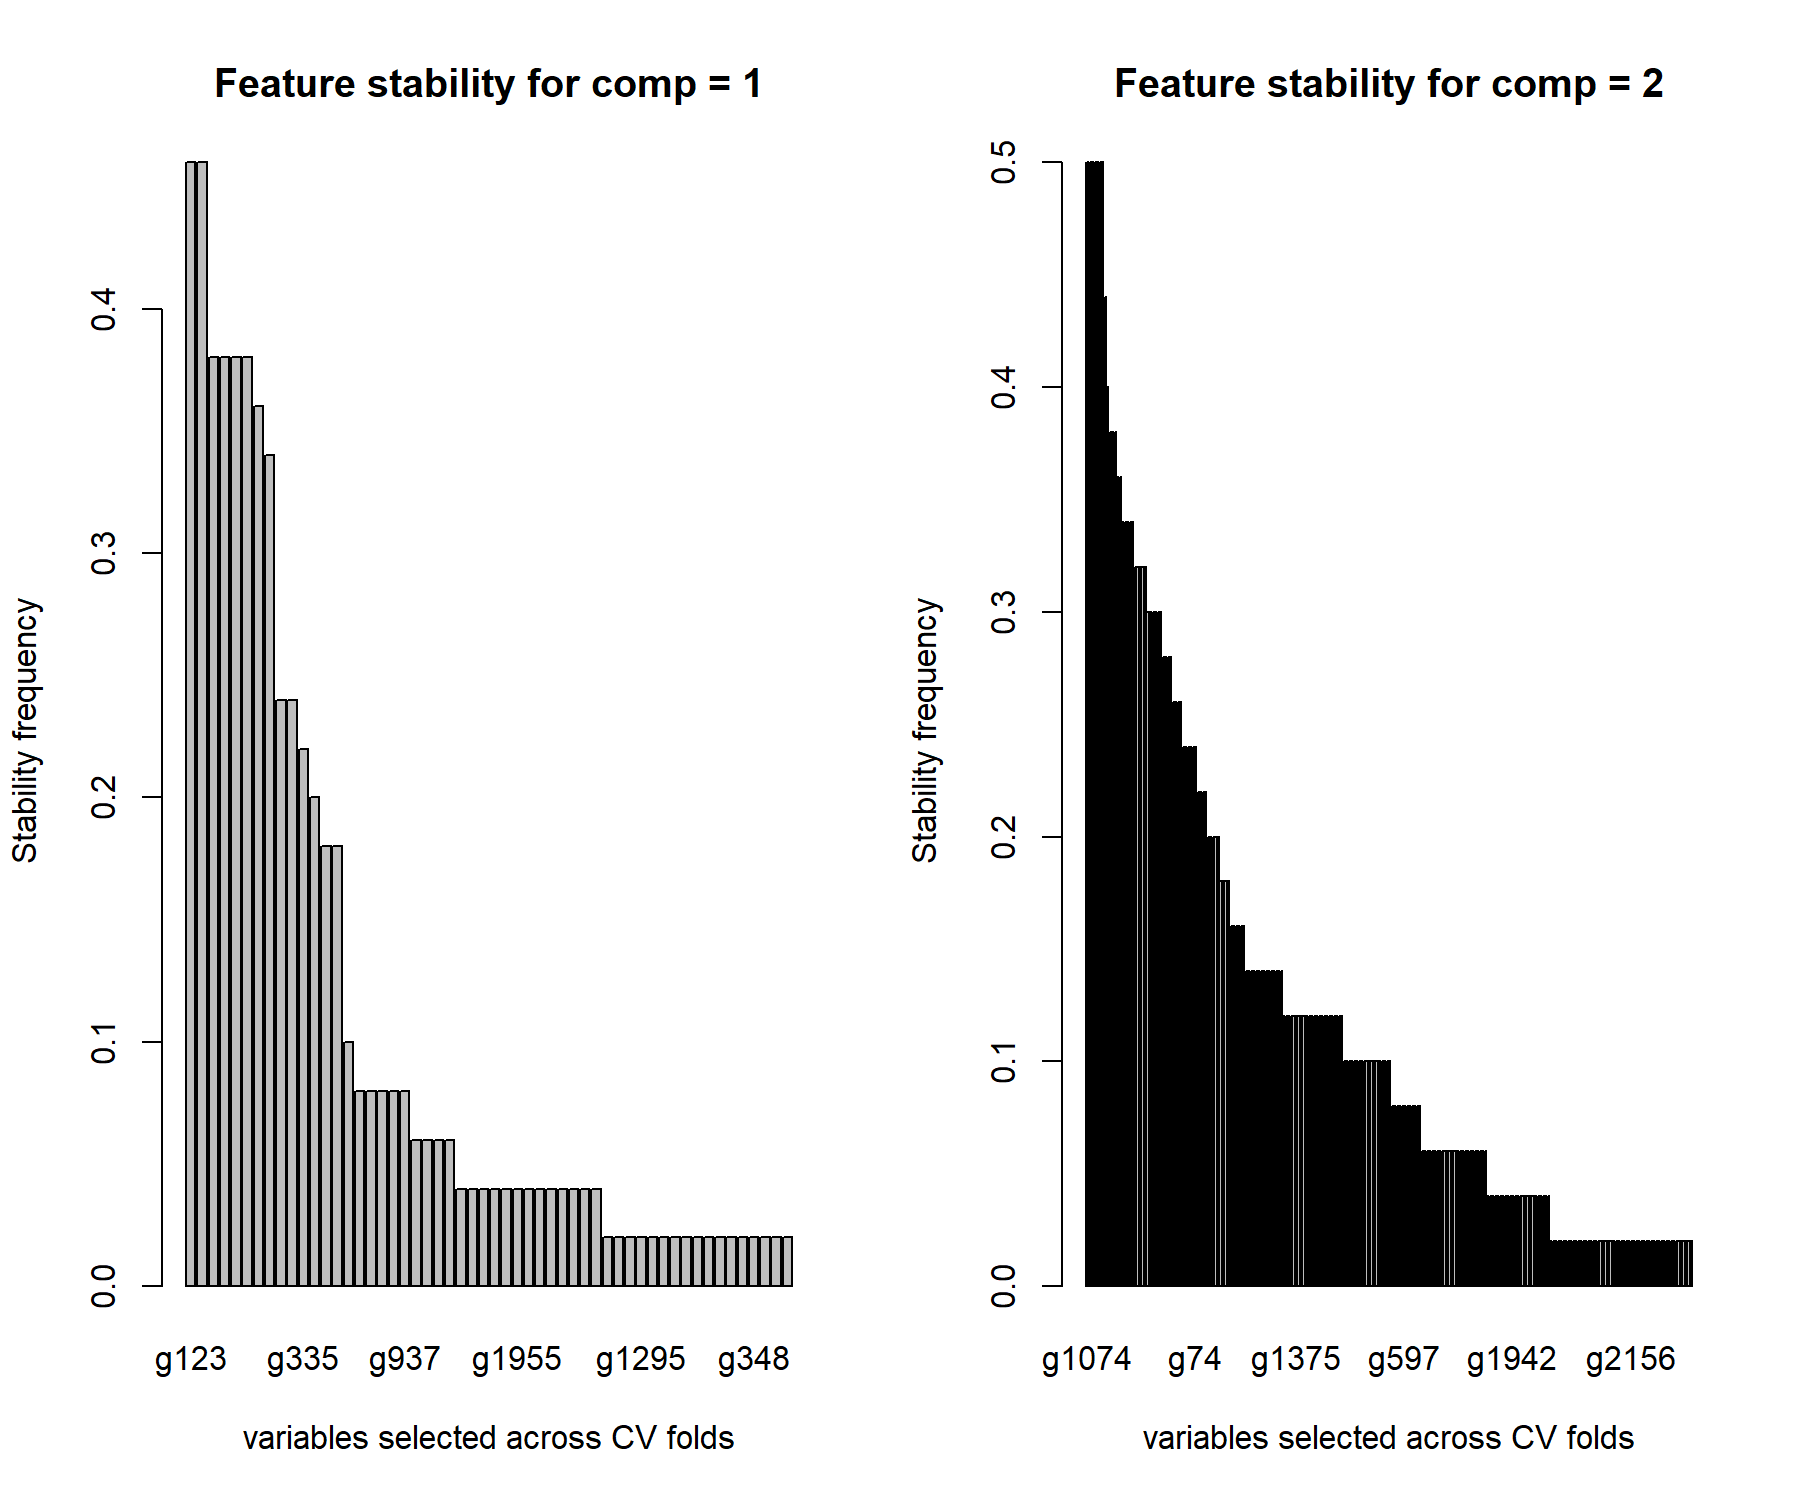 Stability of variable selection from the sPLS-DA on the SRBCT gene expression data. We use a by-product from perf() to assess how often the same variables are selected for a given keepX value in the final sPLS-DA model. The barplot represents the frequency of selection across repeated CV folds for each selected gene for component 1 and 2. The genes are ranked according to decreasing frequency.